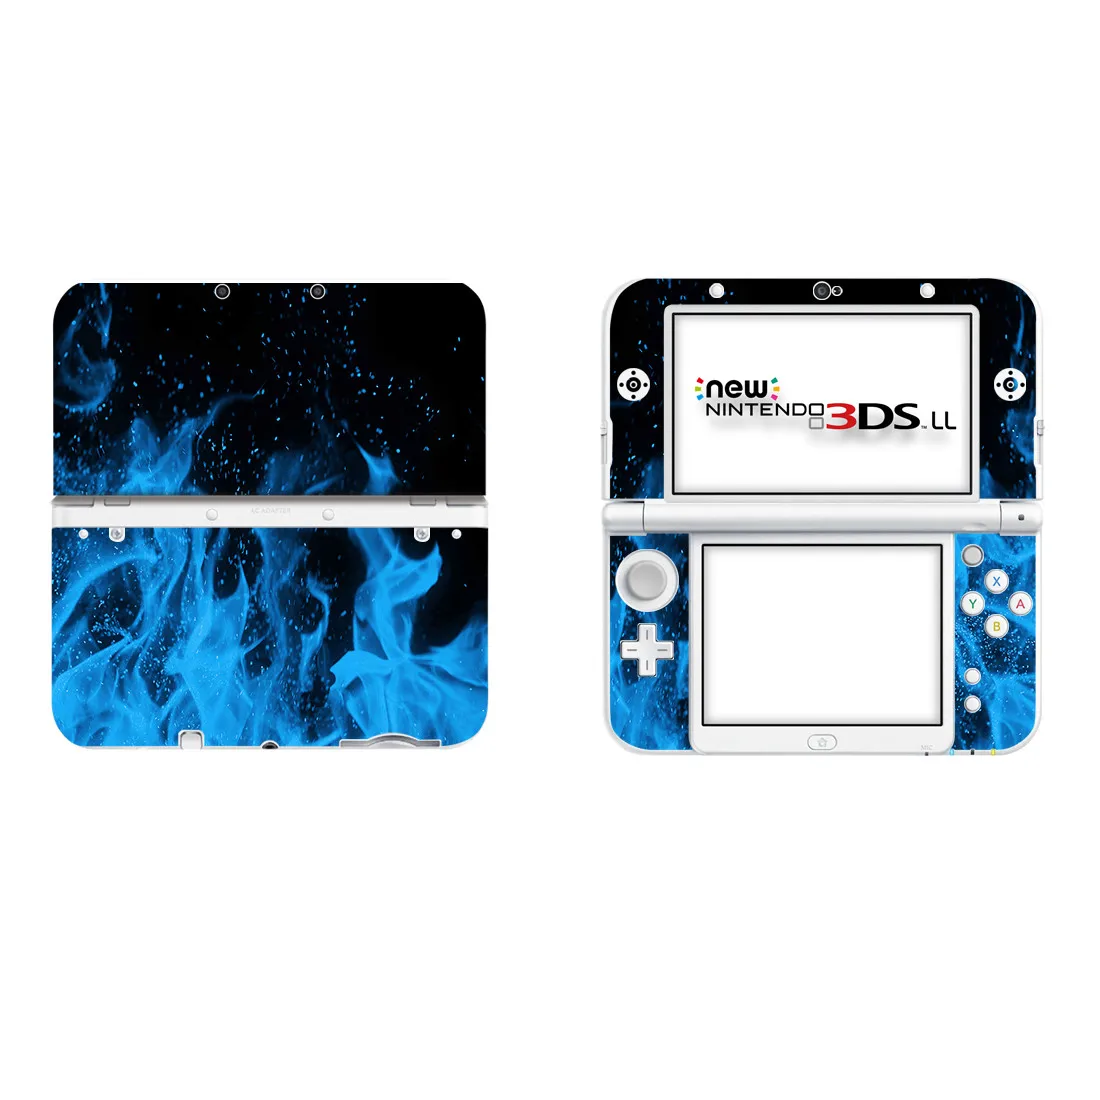 

Blue Fire Full Cover Decal Skin Sticker for NEW 3DS XL Skins Stickers for NEW 3DS LL Vinyl Protector Skin Sticker